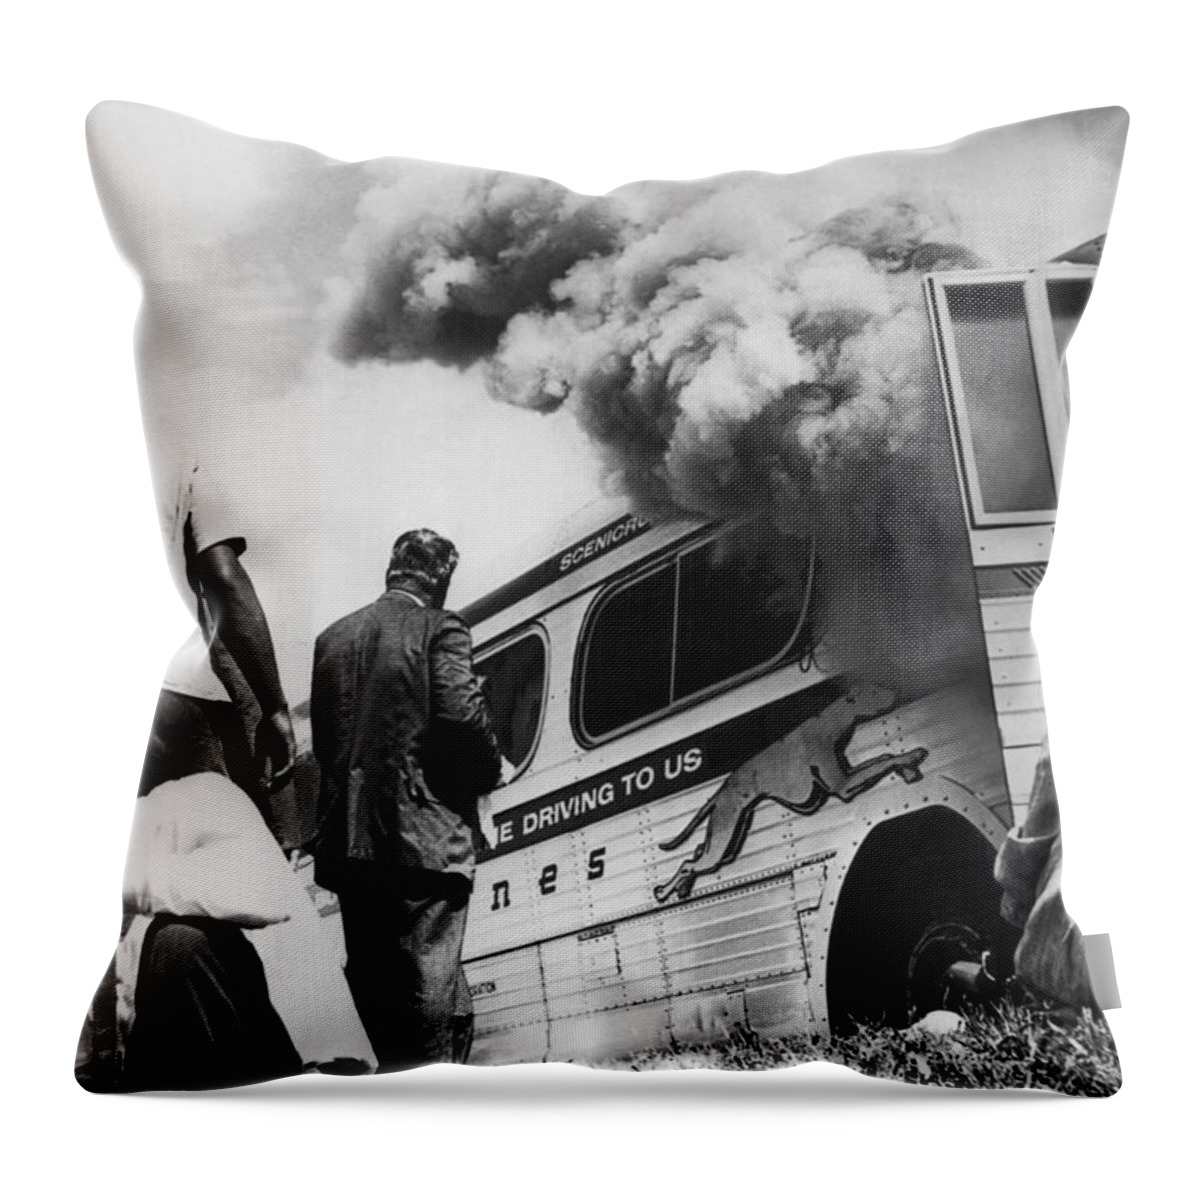 1961 Throw Pillow featuring the photograph Freedom Riders Bus Burned by Underwood Archives